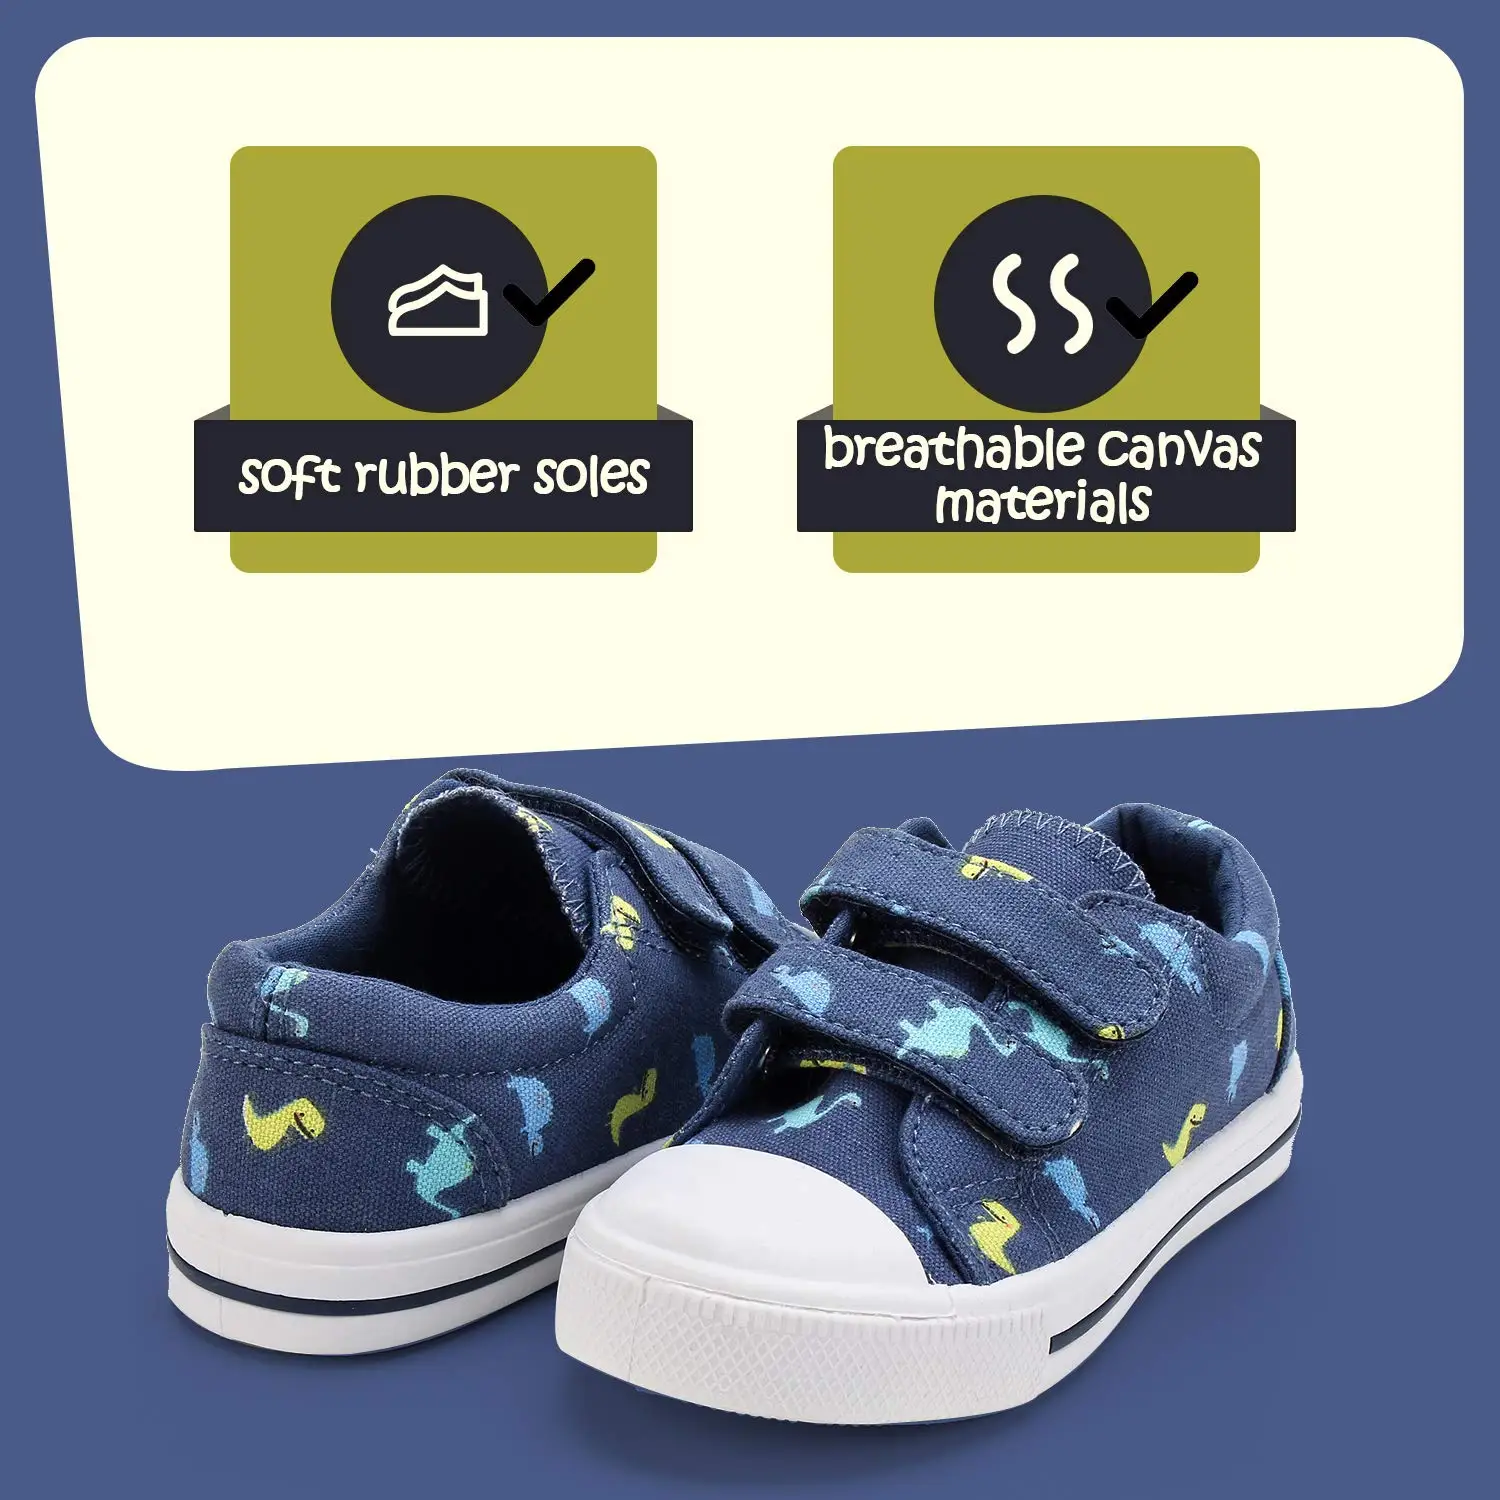 Fashion Toddler Boys And Girls Shoes Kids Canvas Sneakers Cartoon Double Hook And Loop